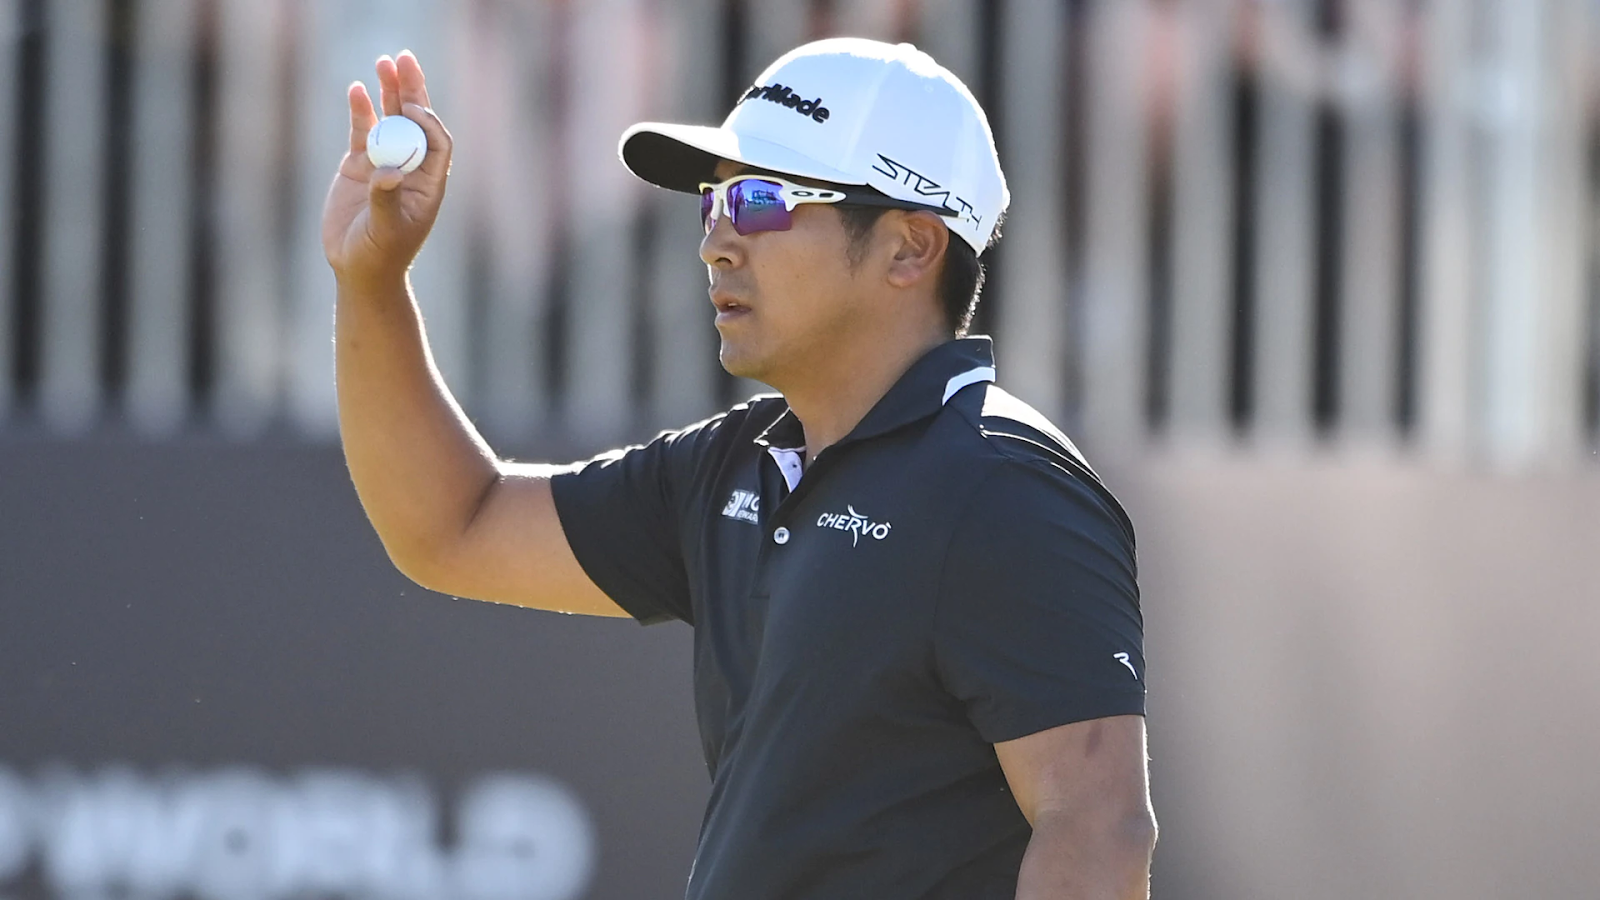 Kurt Kitayama doesn't win Scottish, but he joins 2 others in qualifying for Open. Kurt Kitayama did not come close to winning the Genesis Scottish Open on Sunday